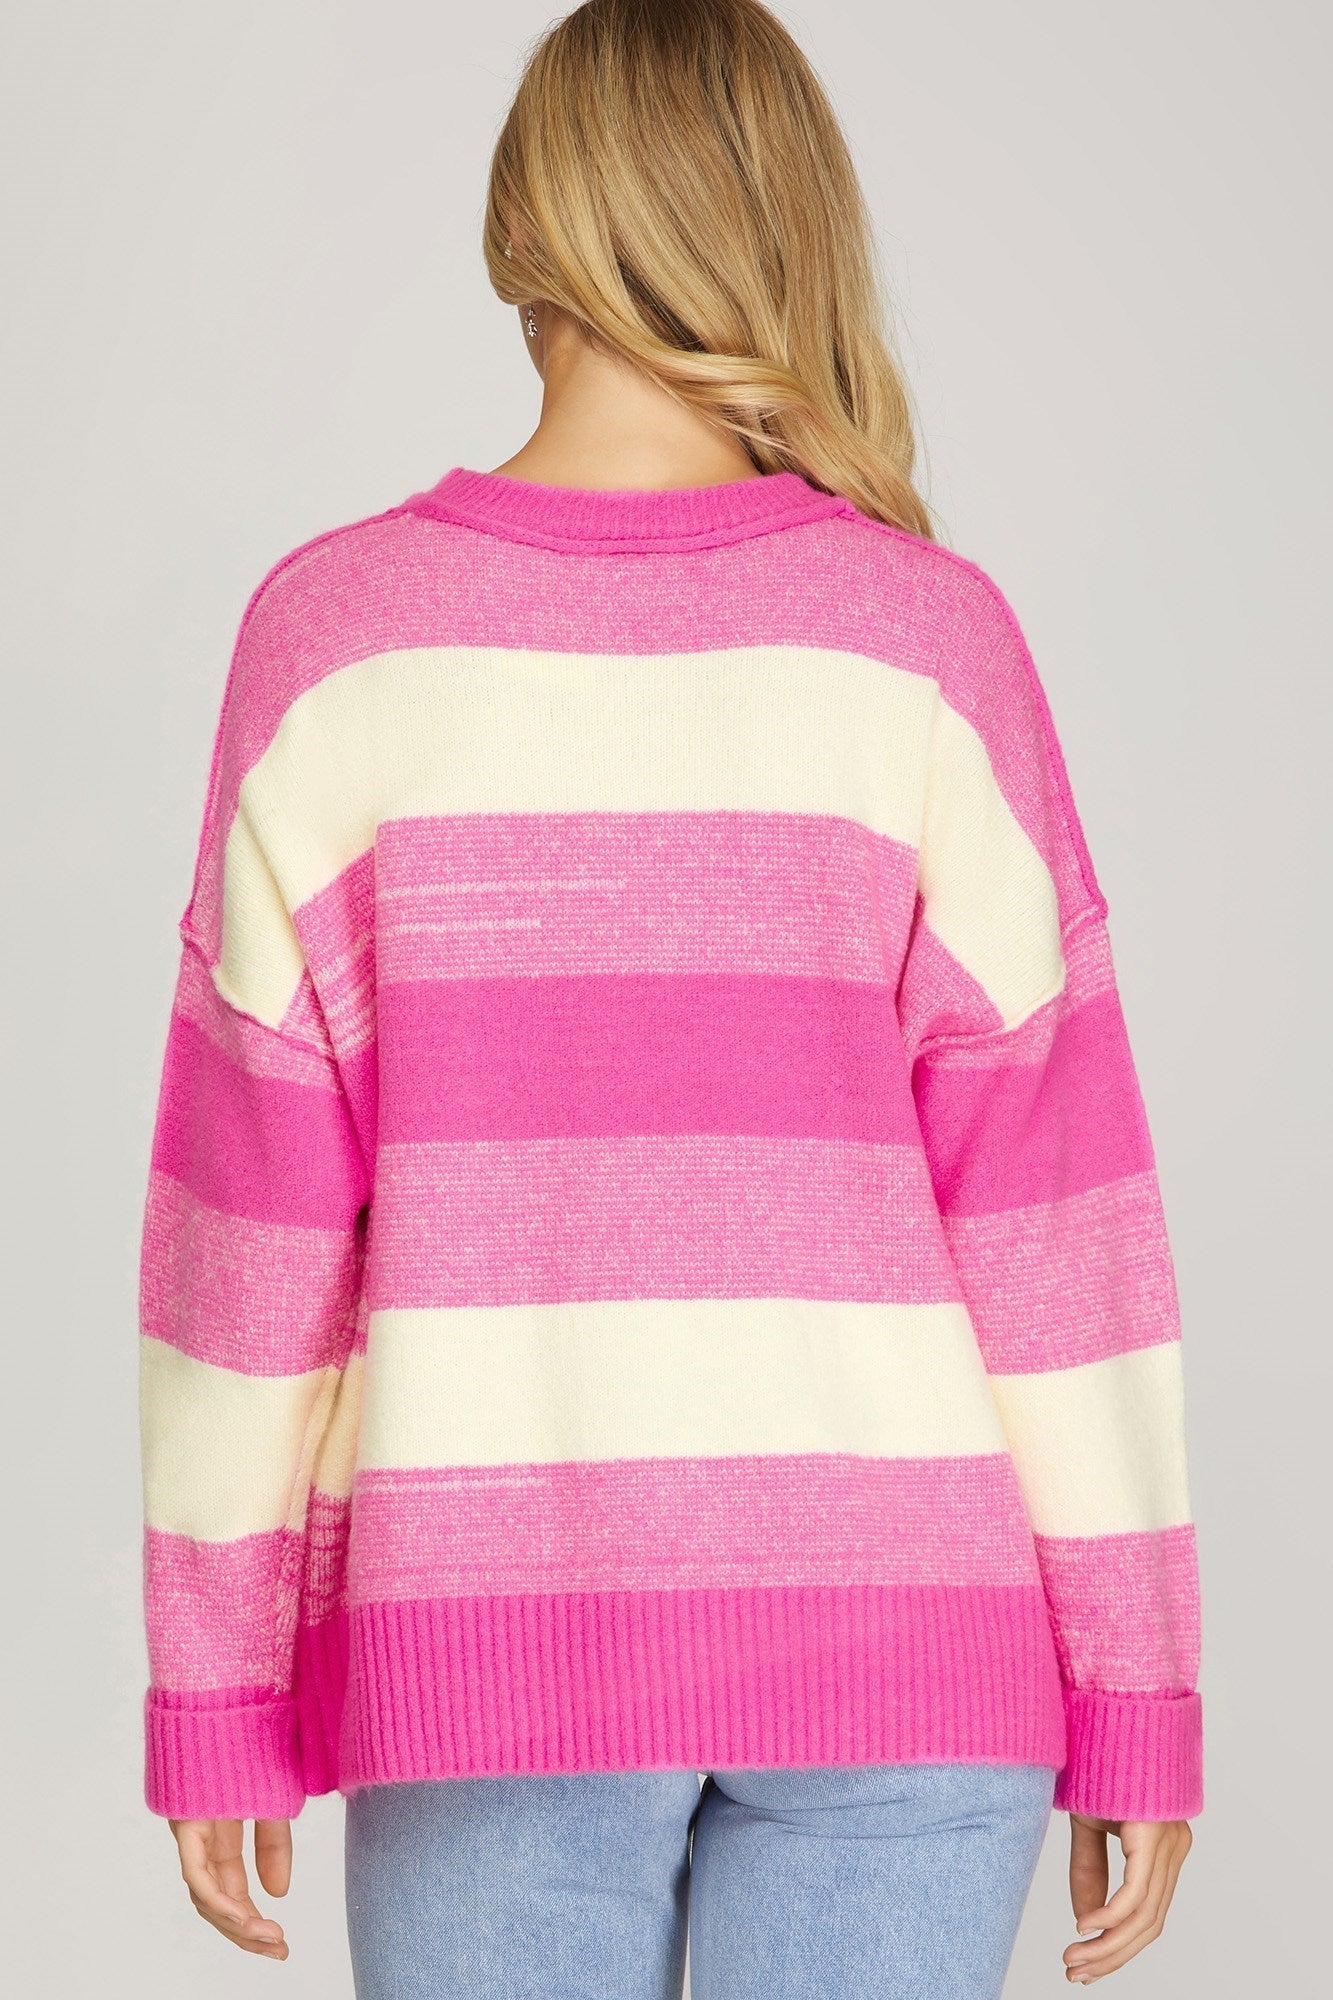 SHE AND SKY Women's Sweaters HOT PINK / S Long Sleeve Striped Sweater Top || David's Clothing SY4361